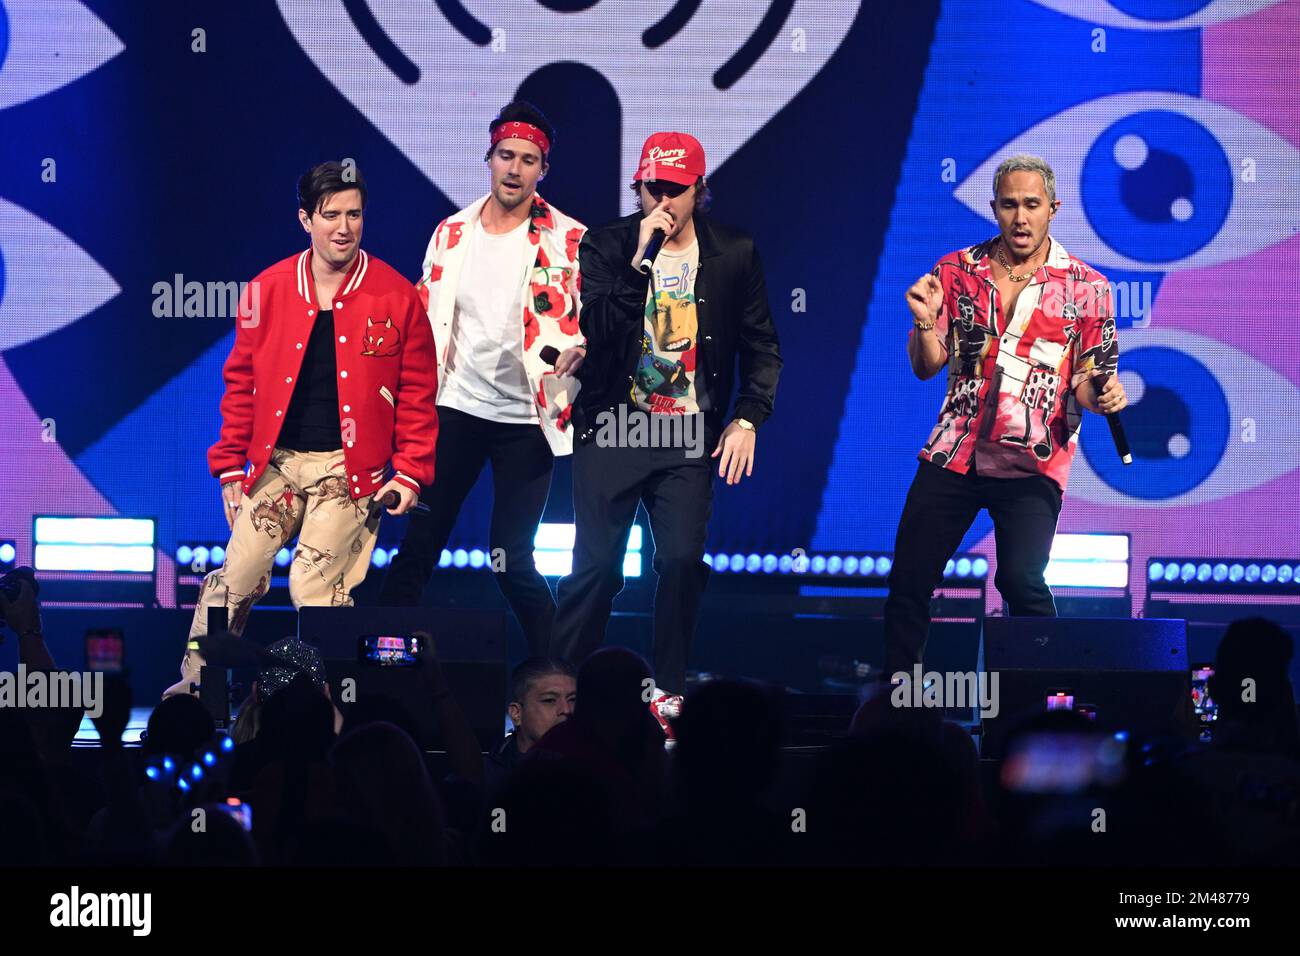 Sunrise FL, USA. 18th Dec, 2022. Kendall Schmidt, Logan Henderson, James Maslow and Carlos Pena Vega of Big Time Rush perform during the iHeartRadio Y100 Jingle Ball 2022 at The FLA Live Arena on December 18, 2022 in Sunrise, Florida. Credit: Mpi04/Media Punch/Alamy Live News Stock Photo